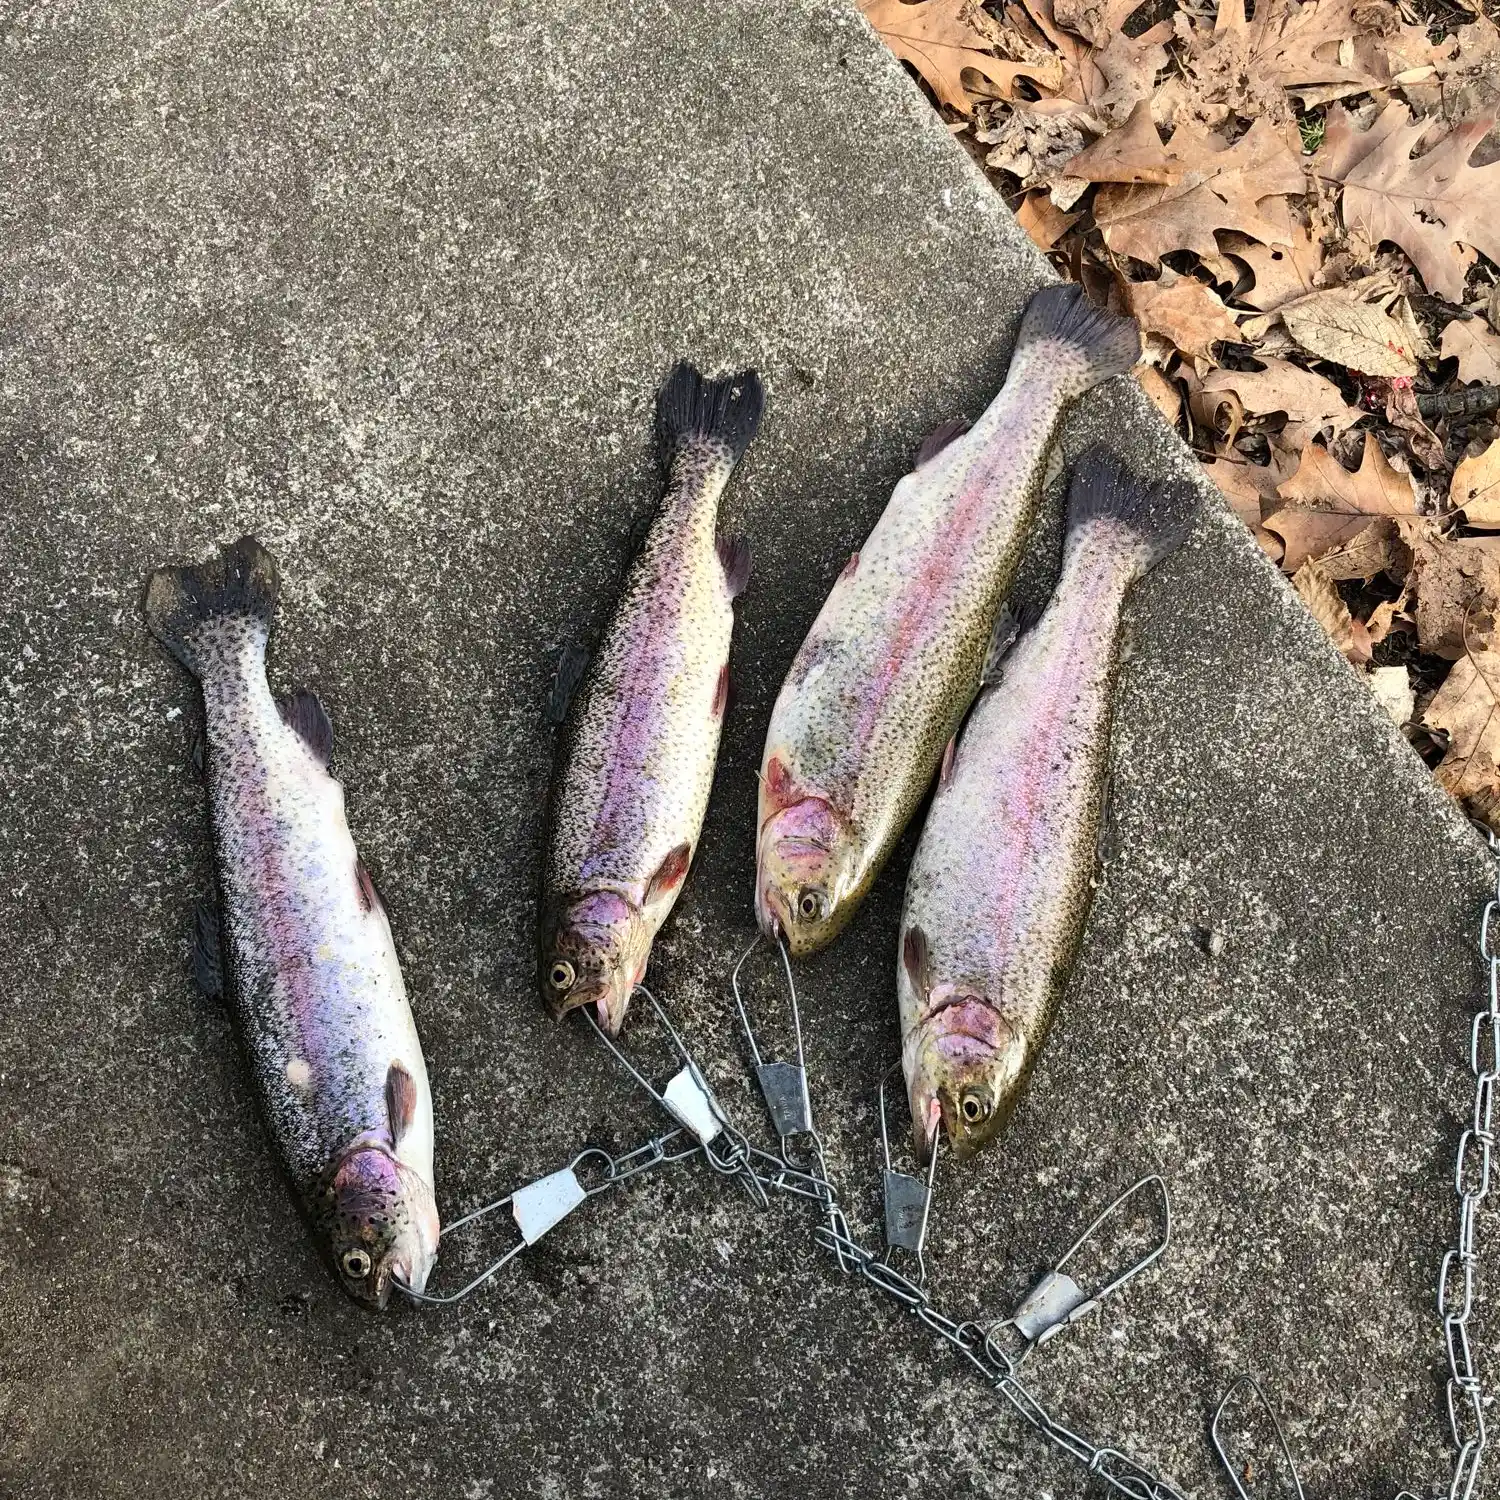 Caught a dozen Rainbow trout on in-line spinners yesterday out of a creek  in NJ. All the Rainbow trout measured between 10-12 inches, (average size  for NJ stocked trout) but it was